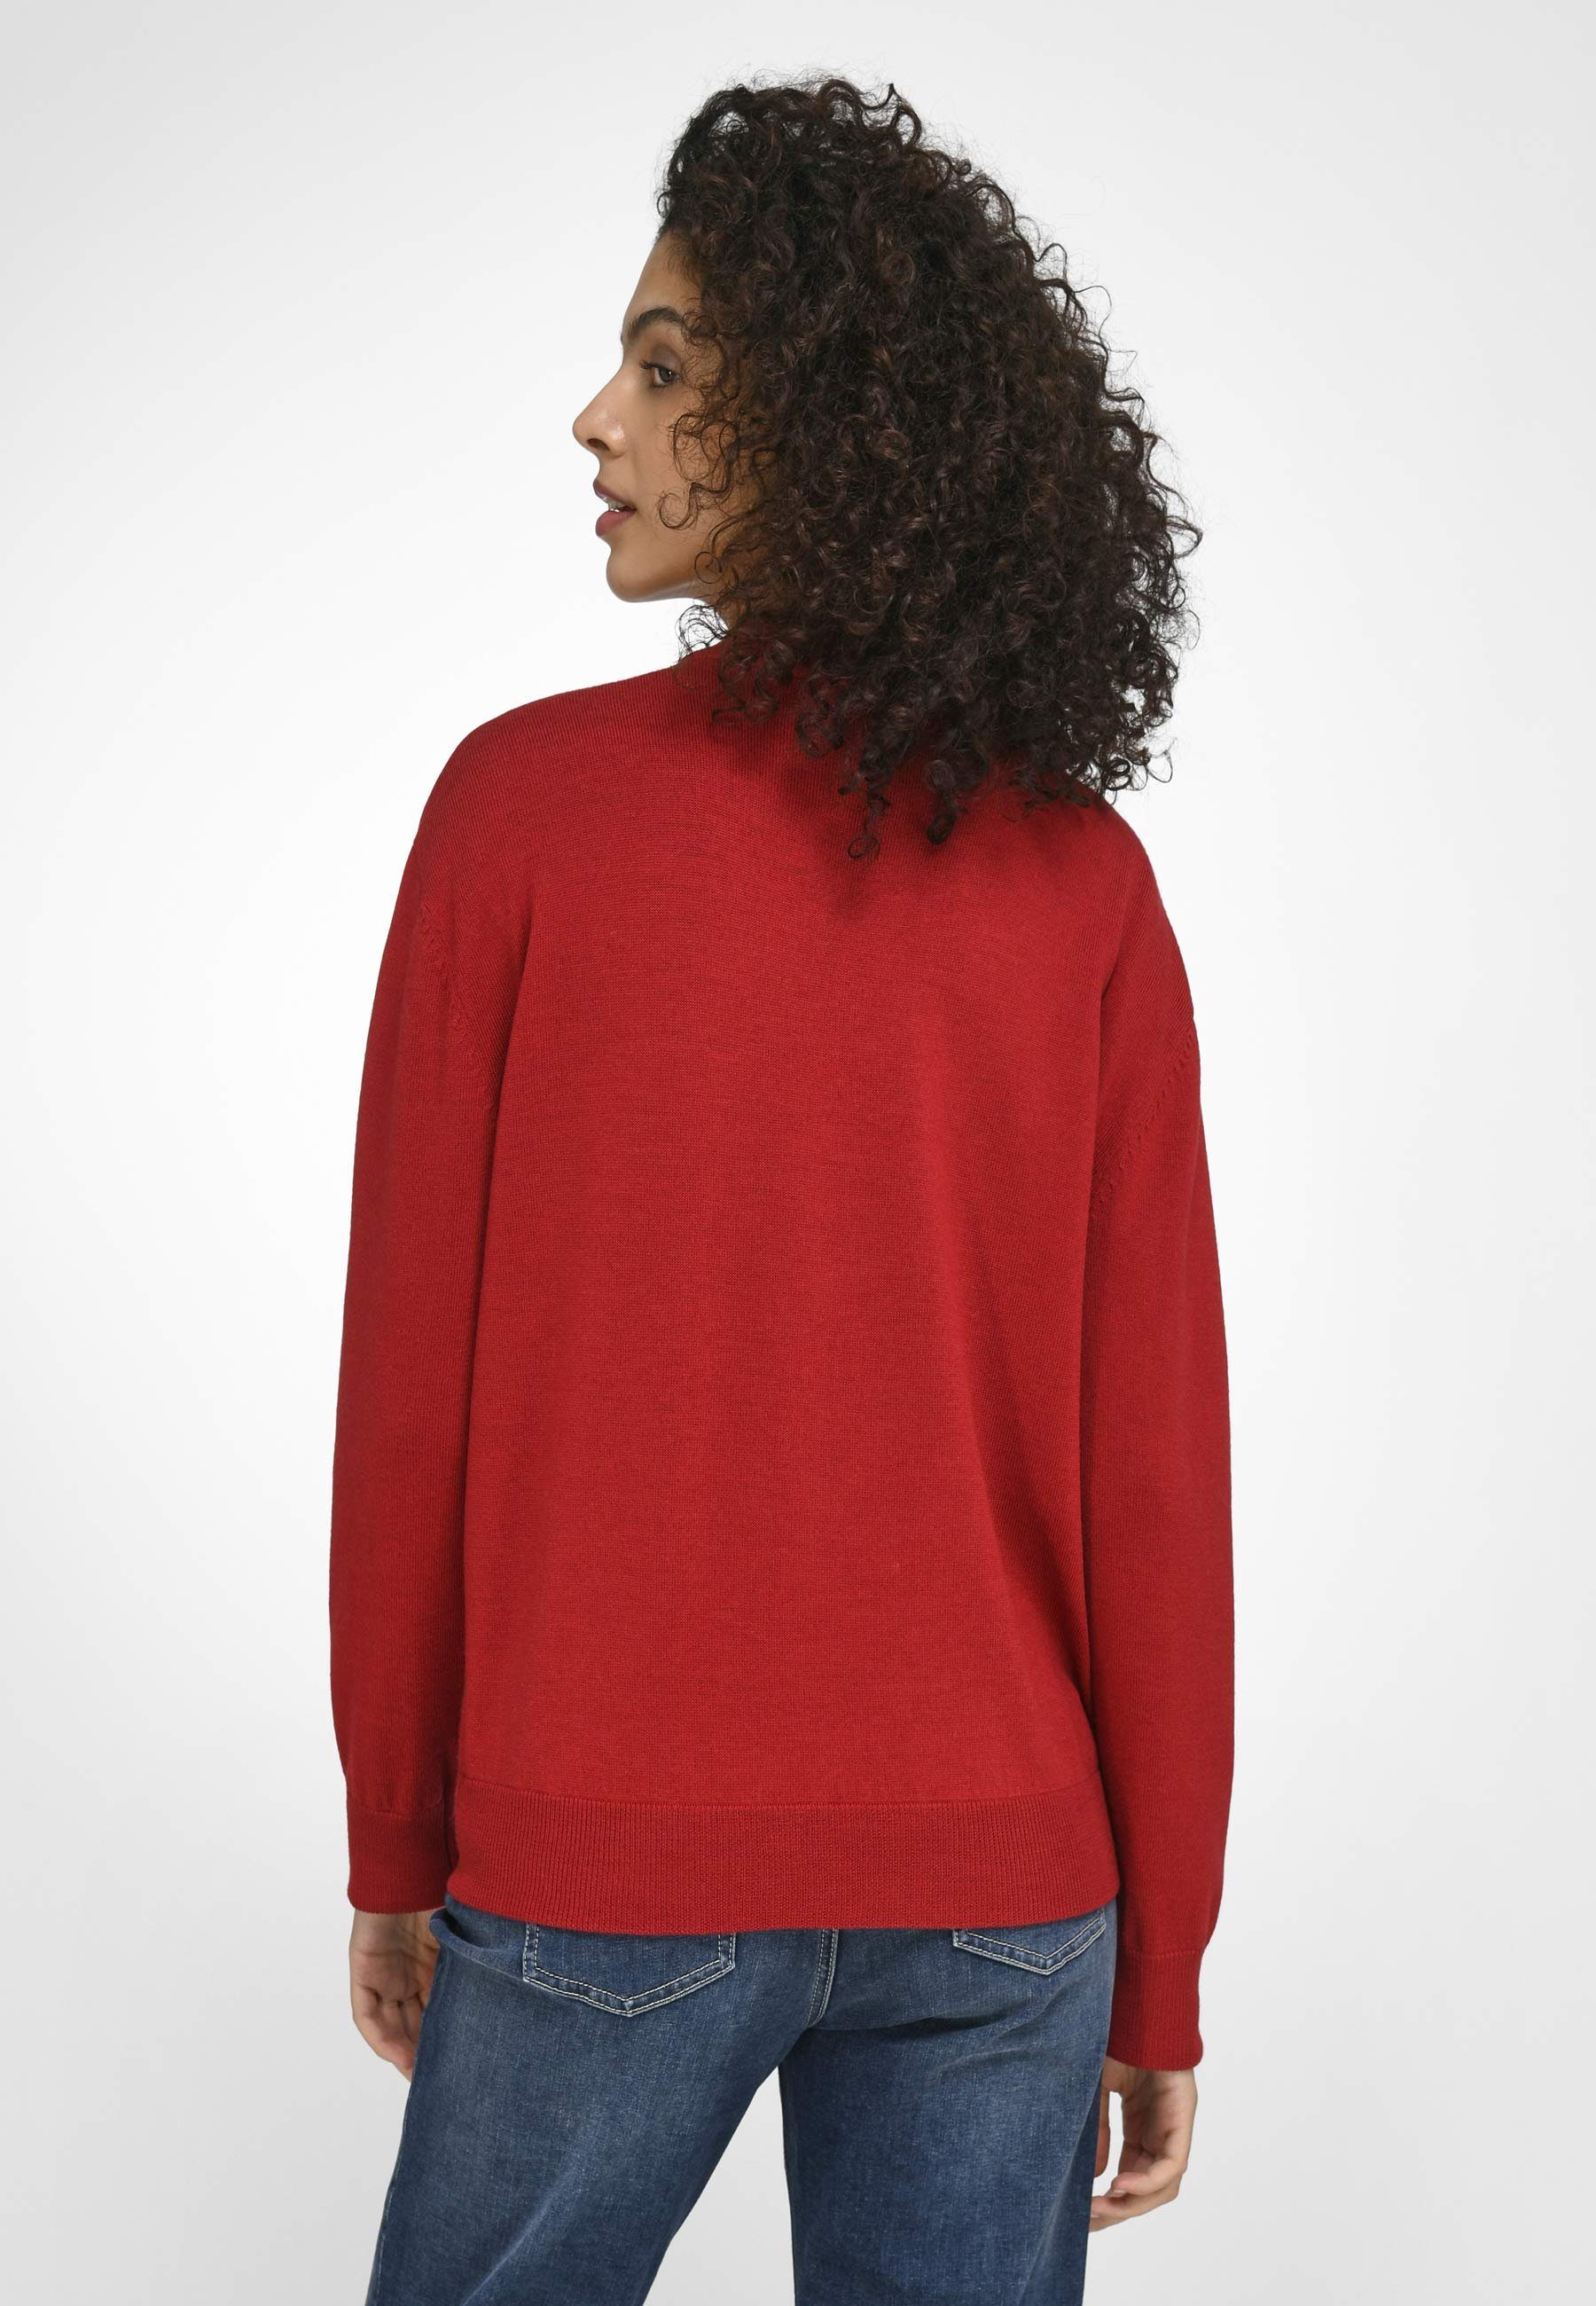 wool Hahn new Strickpullover Peter ROT